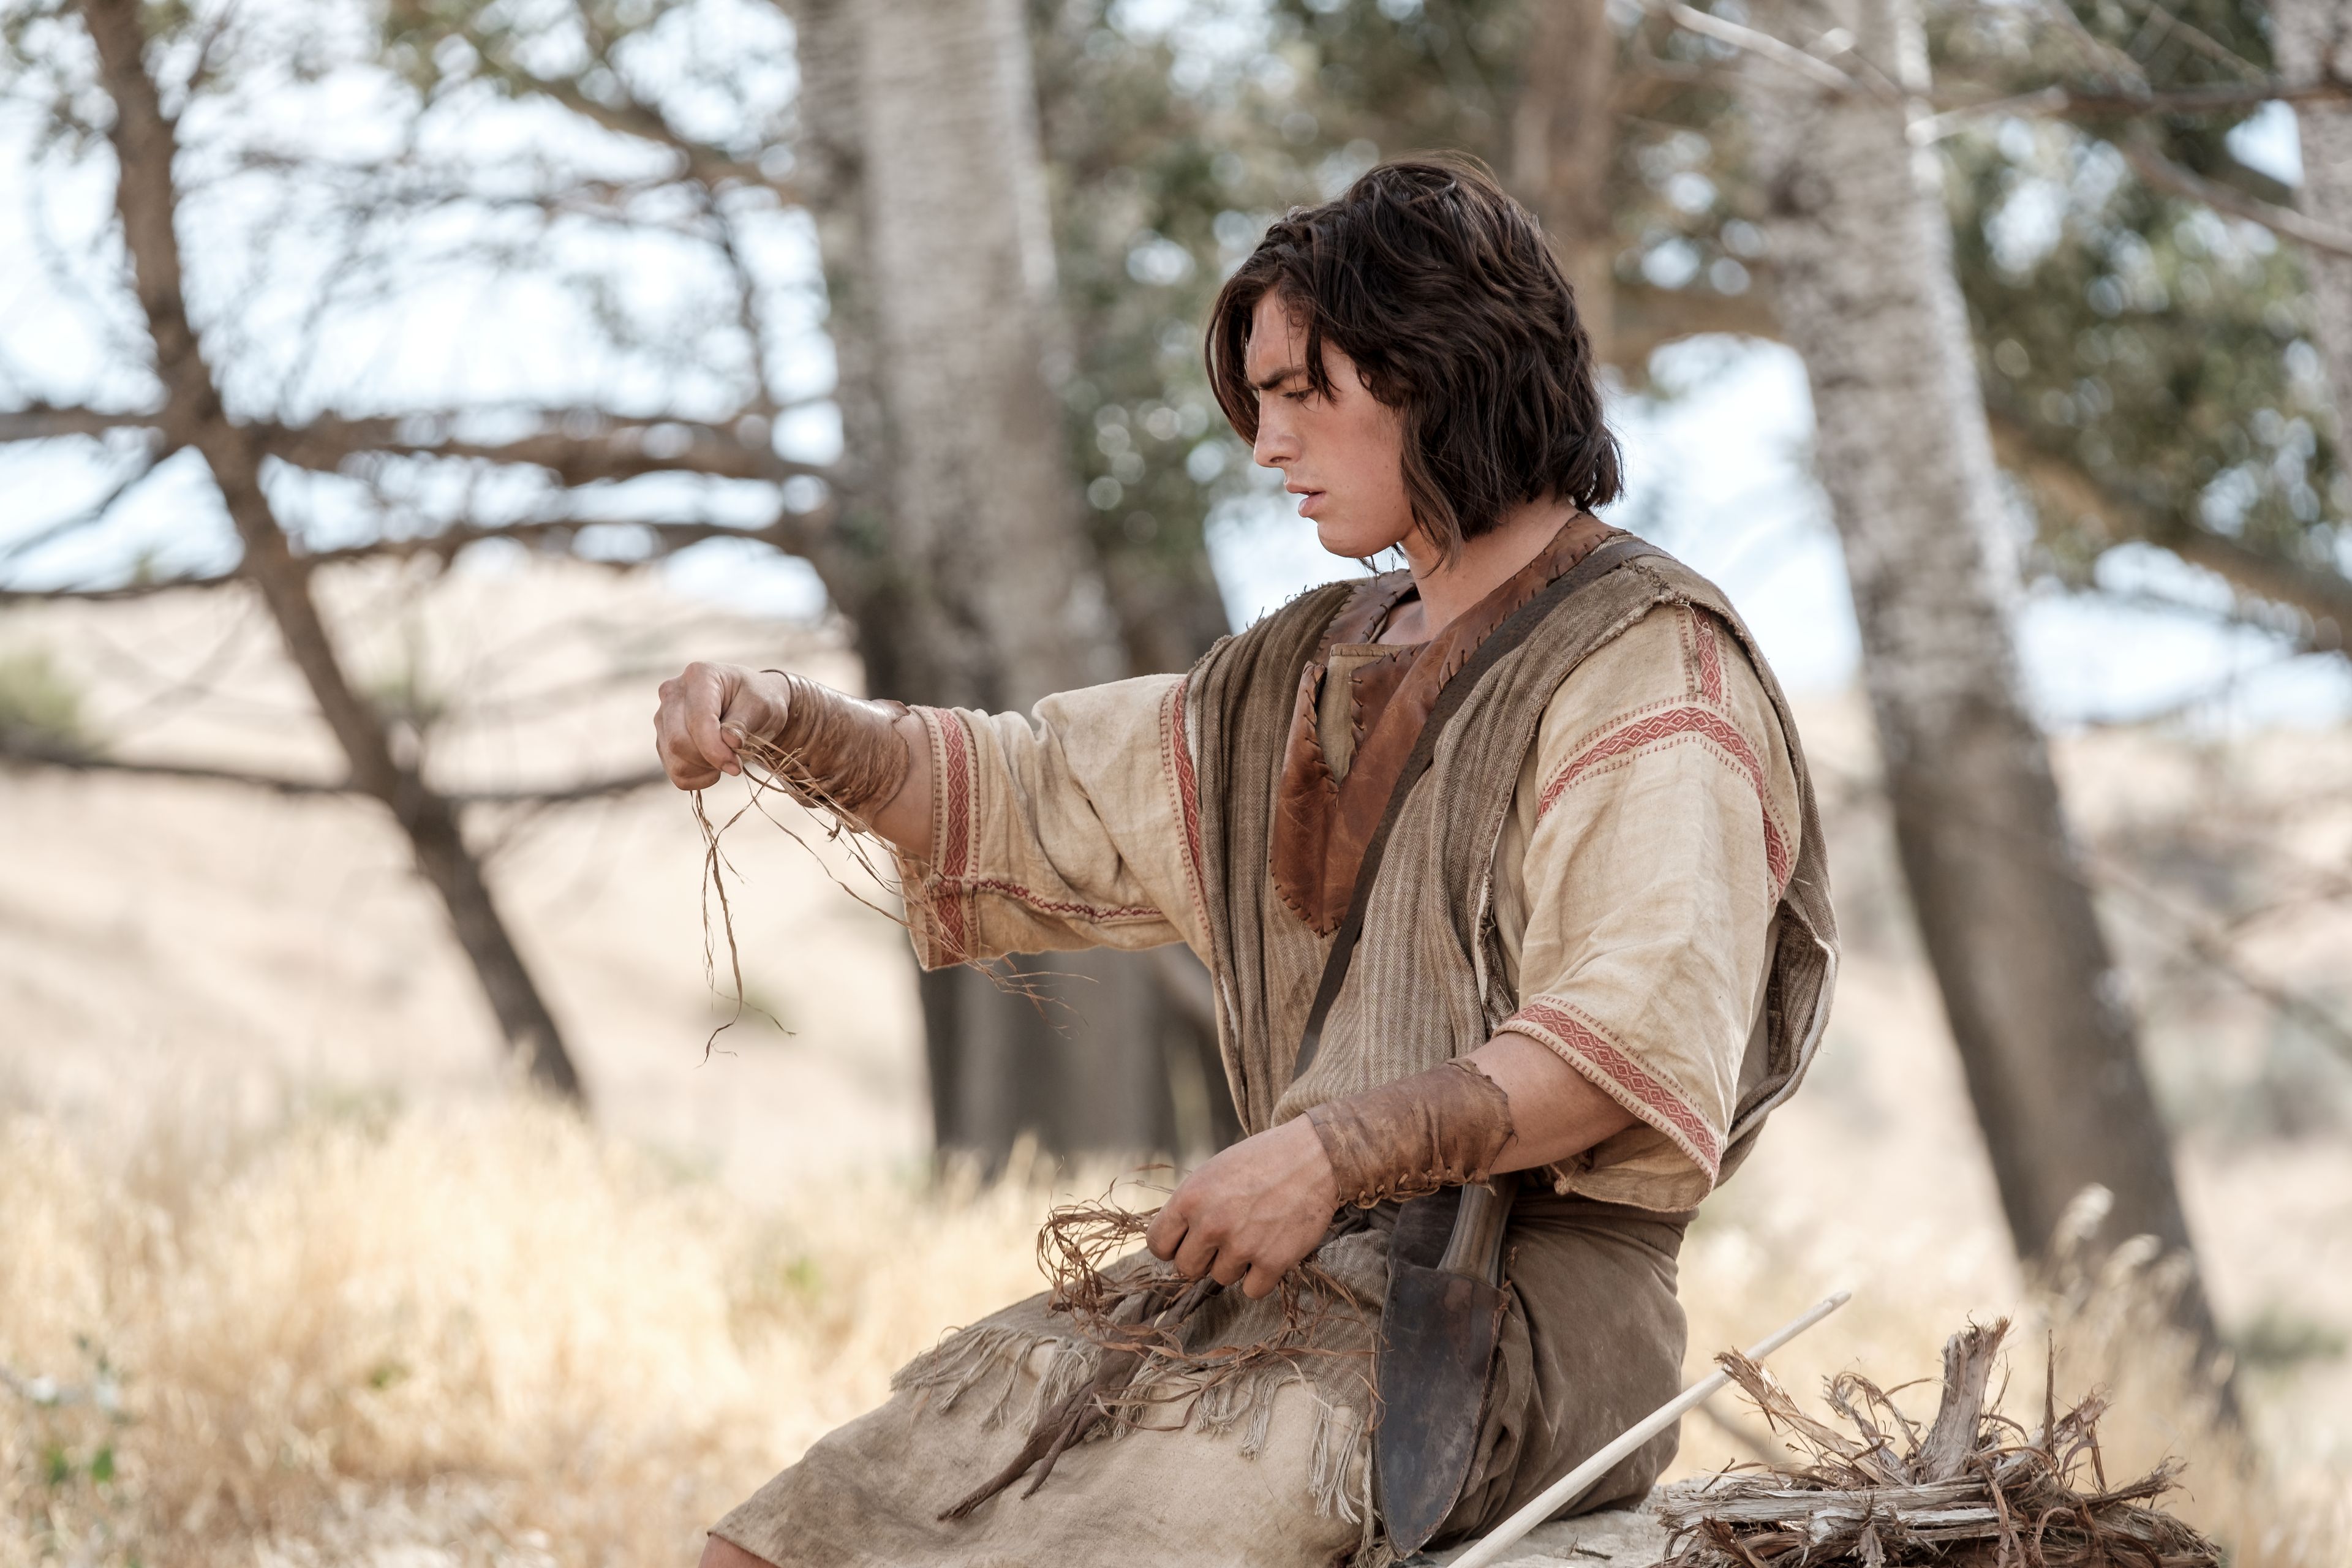 Nephi makes a new bow in the wilderness.